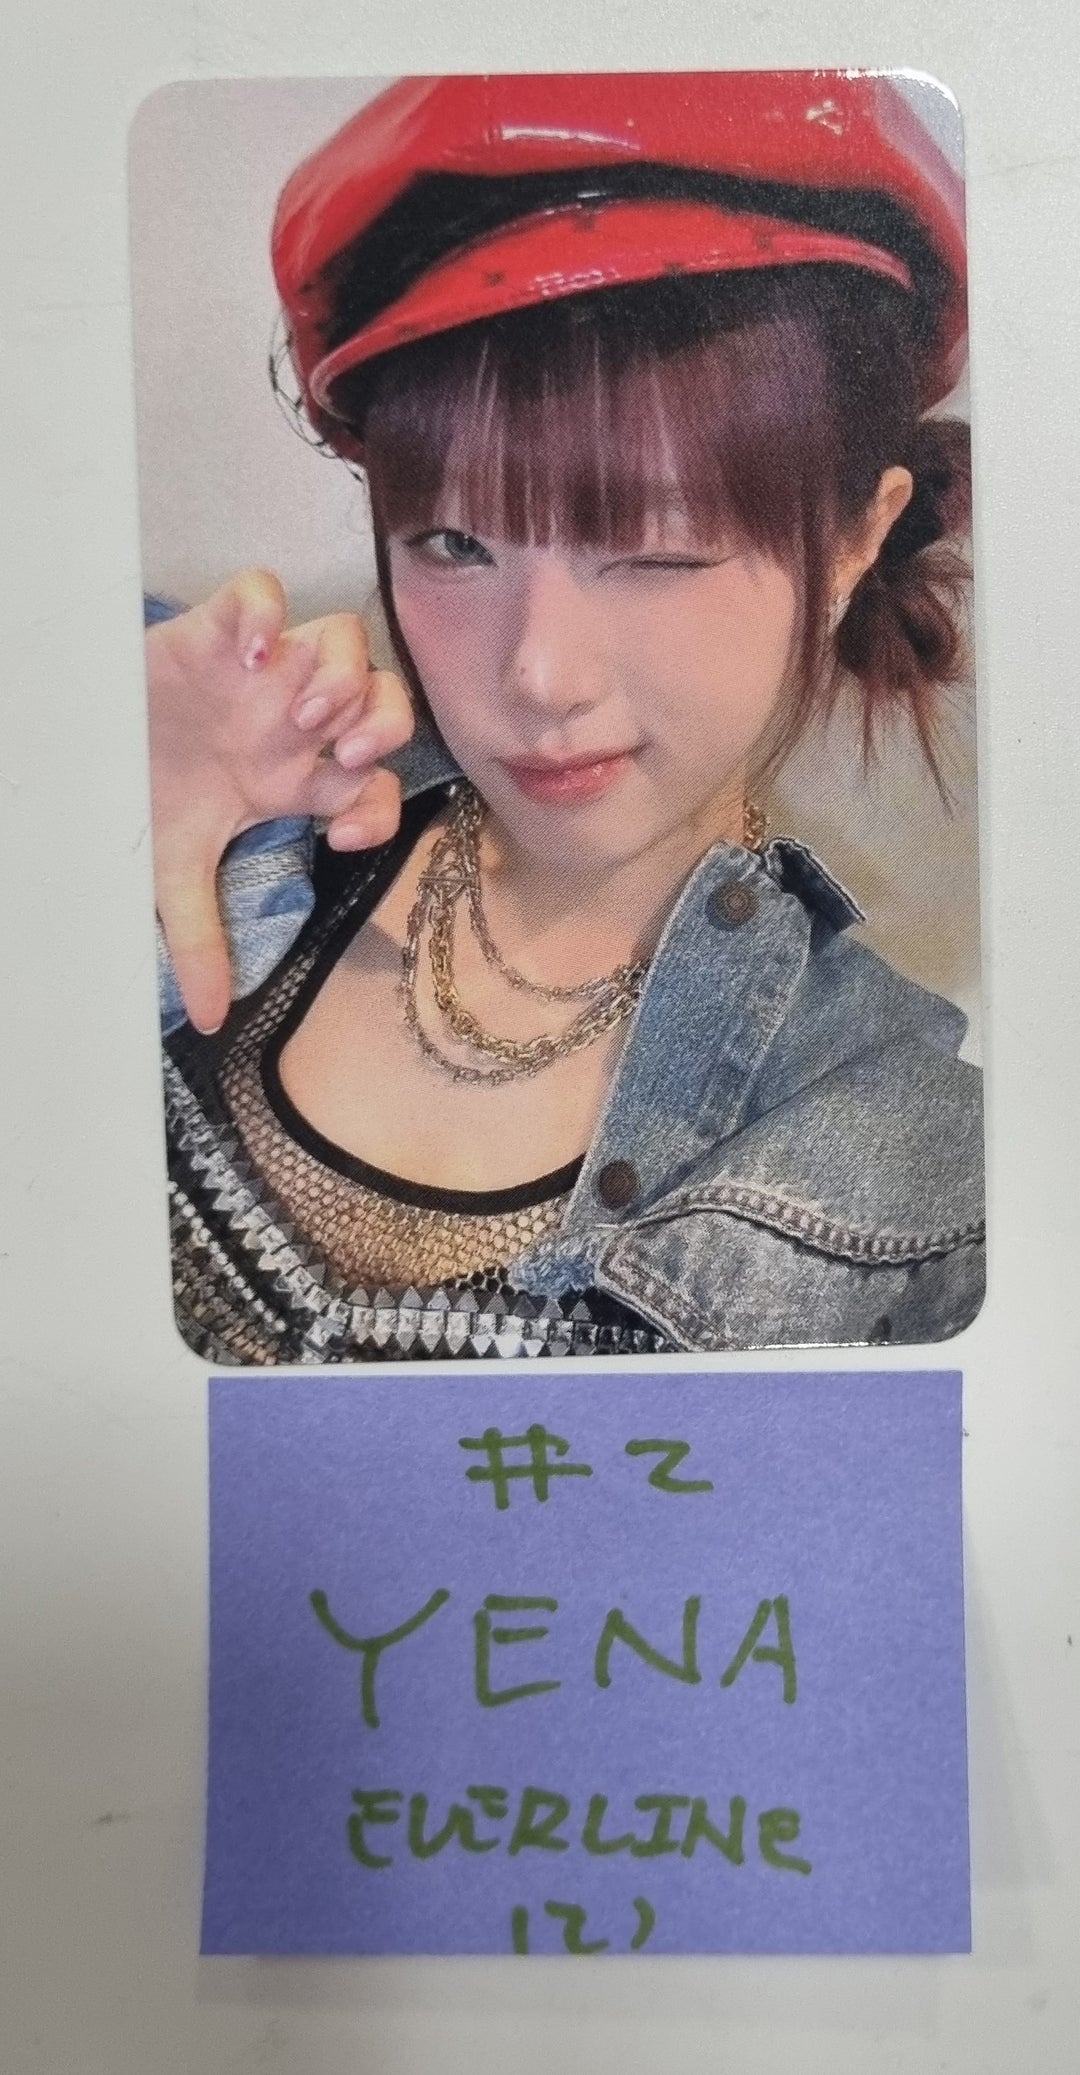 YENA "Good Morning" - Everline Fansign Event Photocard Round 3 [24.3.13]